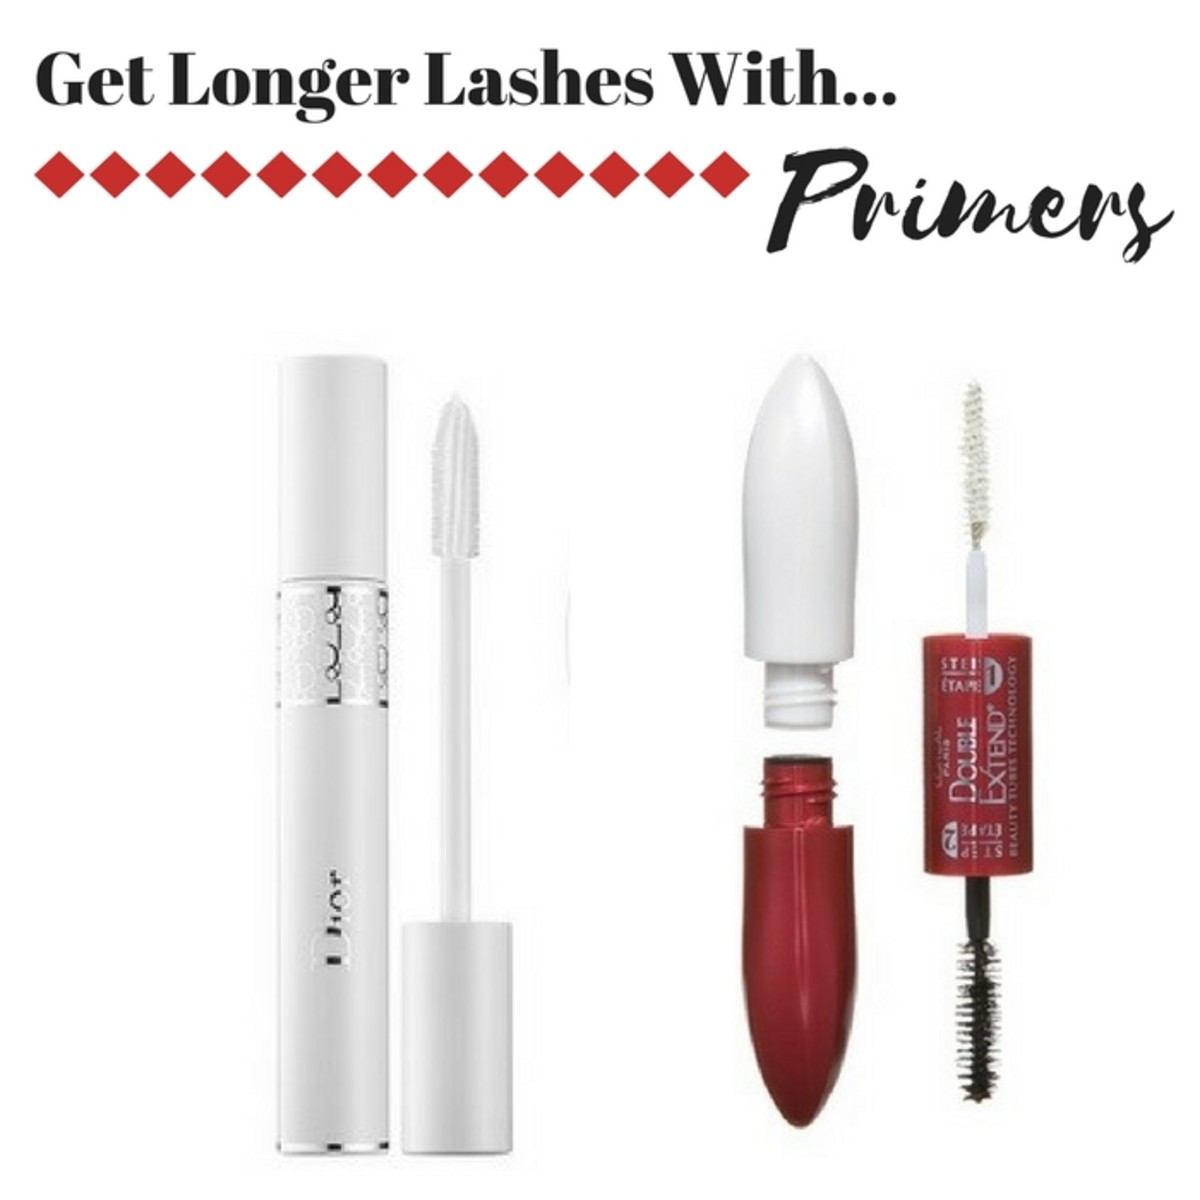 Get Longer Lashes with Primers